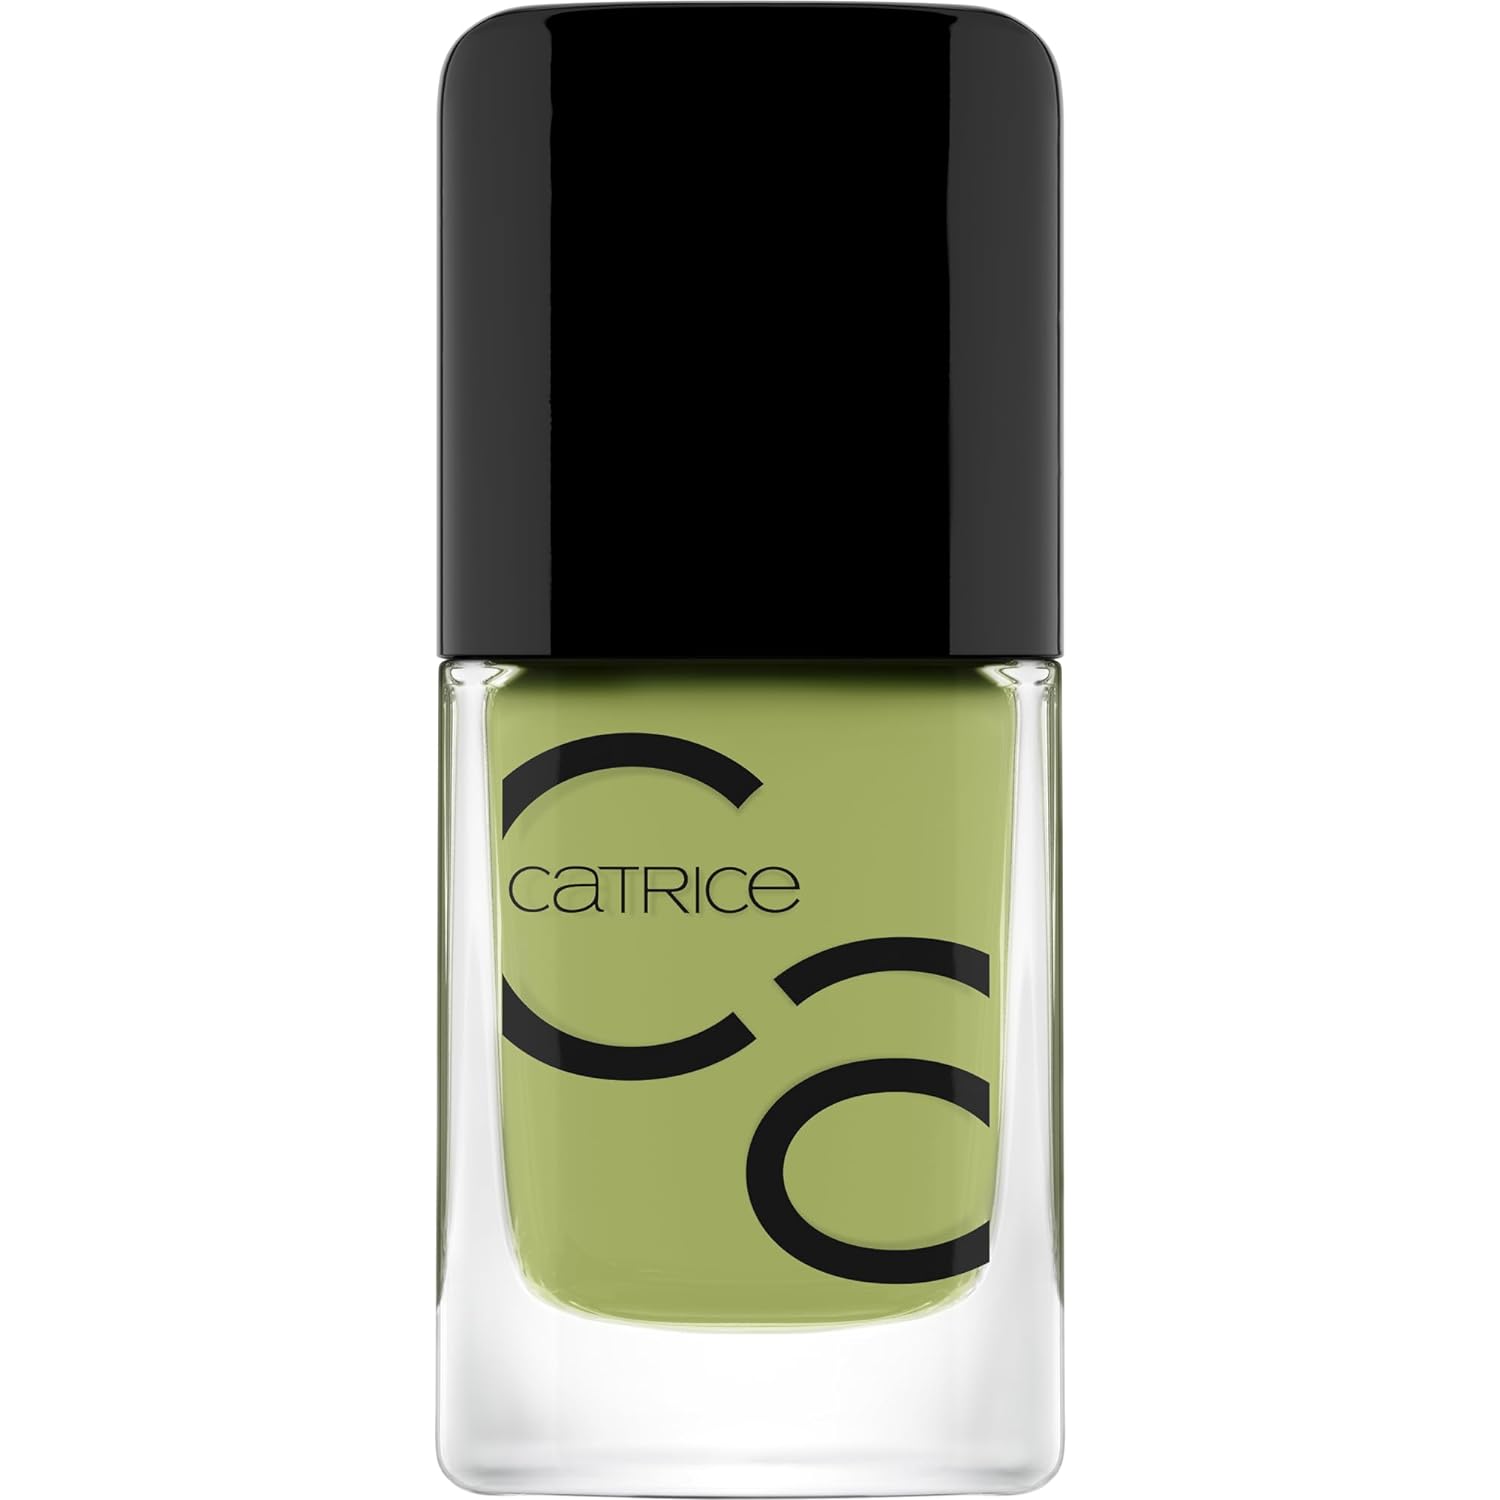 Catrice Catrice Iconails Gel Lacquer, Nail Polish, No. 176, Green, Long-Lasting, Shiny, Acetone-Free, vegan, no Microplastic Particles, no Preservatives, Pack of 10.5 ml